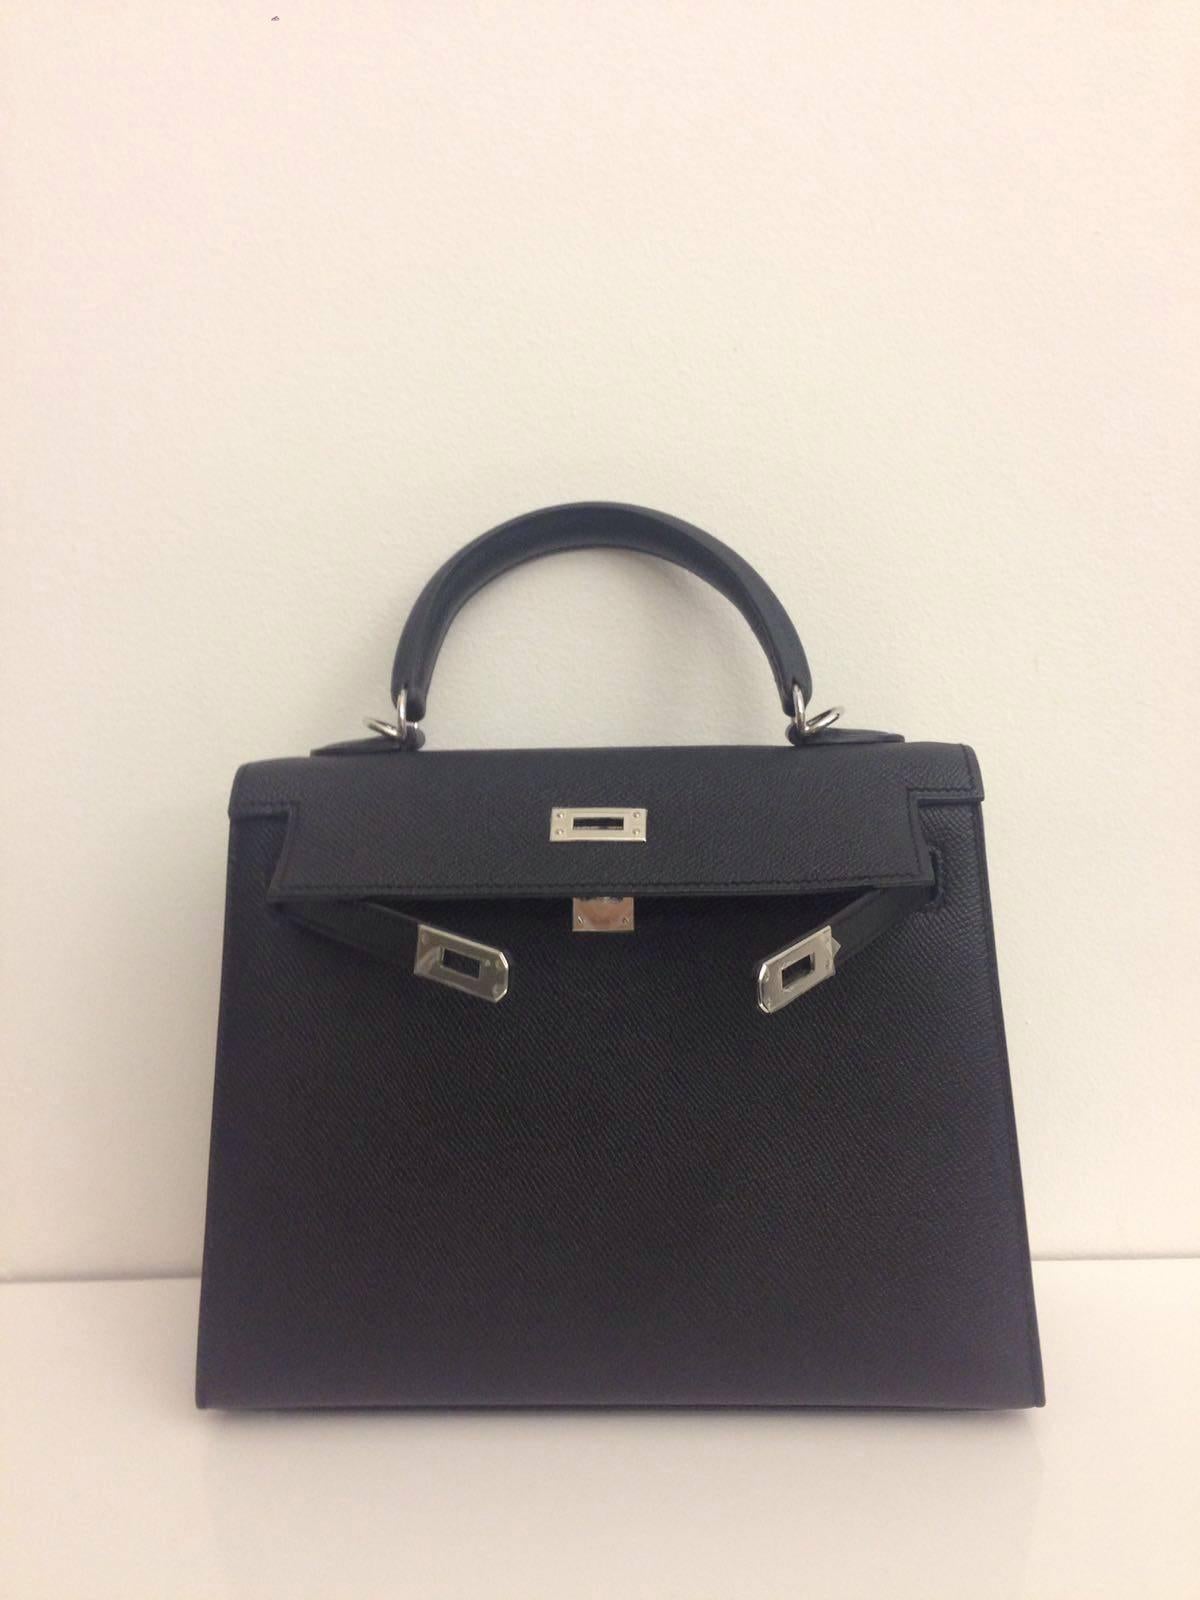 Hermes, Kelly Bag, Size 25, Colour Black (noir),leatherepsom, Palladium Hardware (sliver)
  

This bag comes with a cross body strap, clochette, raincoat, reciept, Leather guide booklet, box and dustbag.